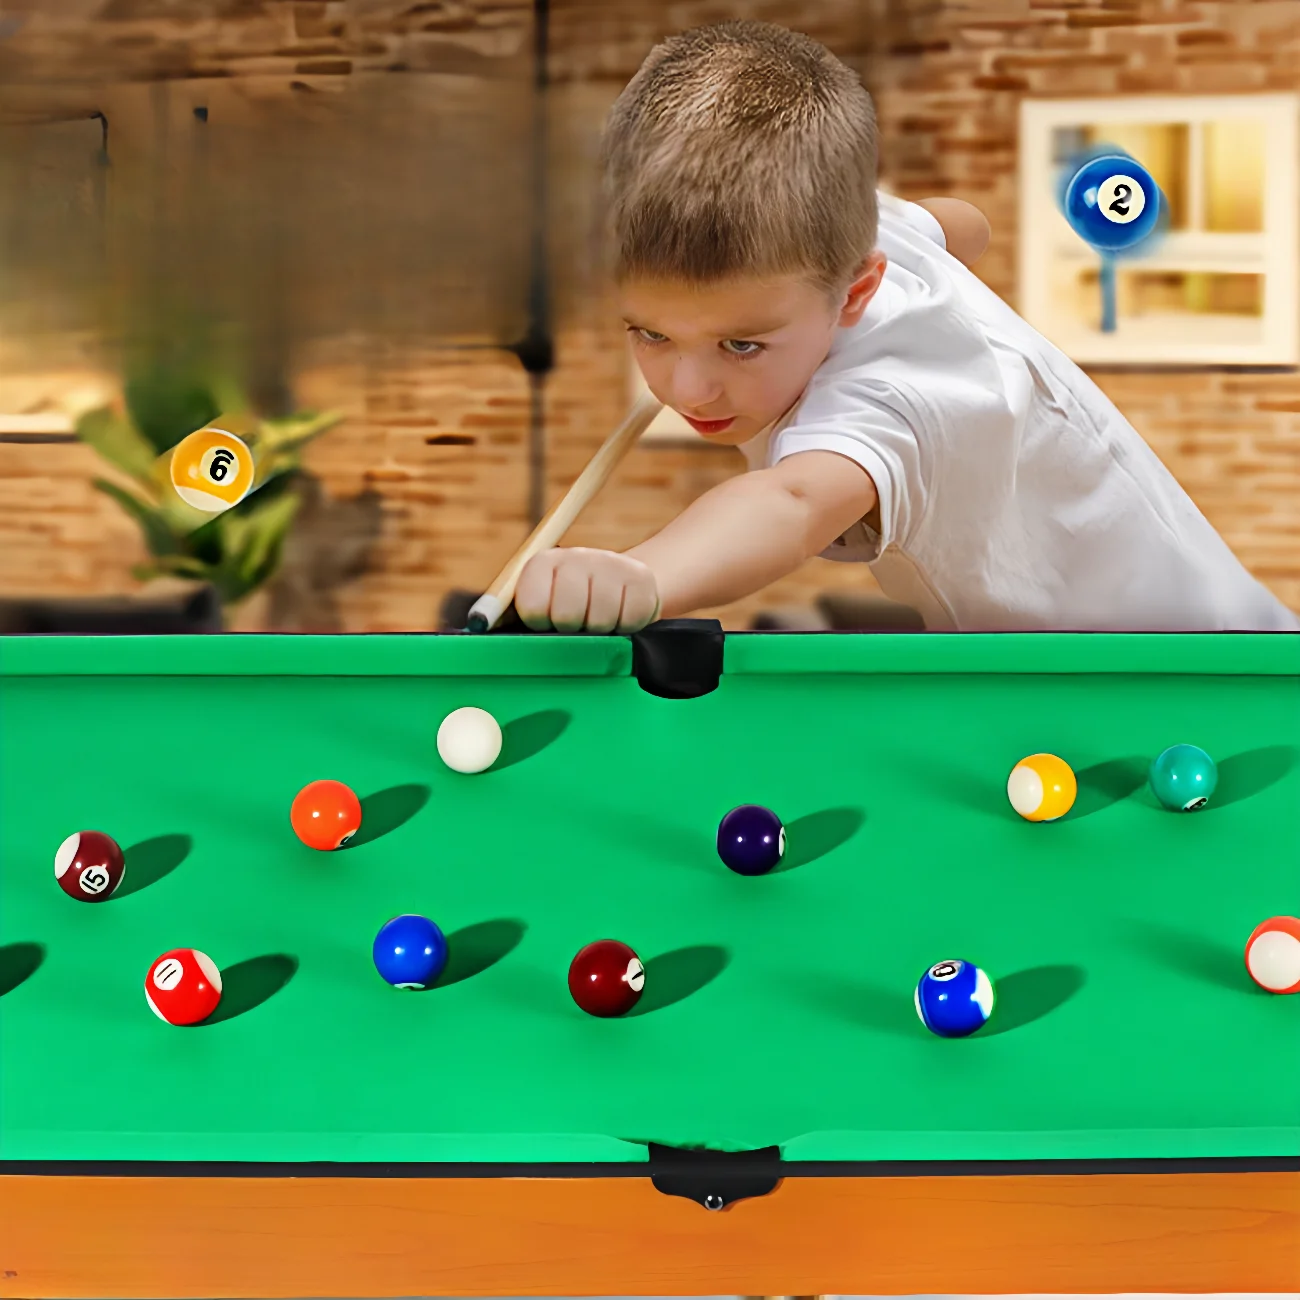 Premium 16 Colored Pool Balls Set for Children's Billiards Table - 25.2mm - Finely Crafted with Superior Materials